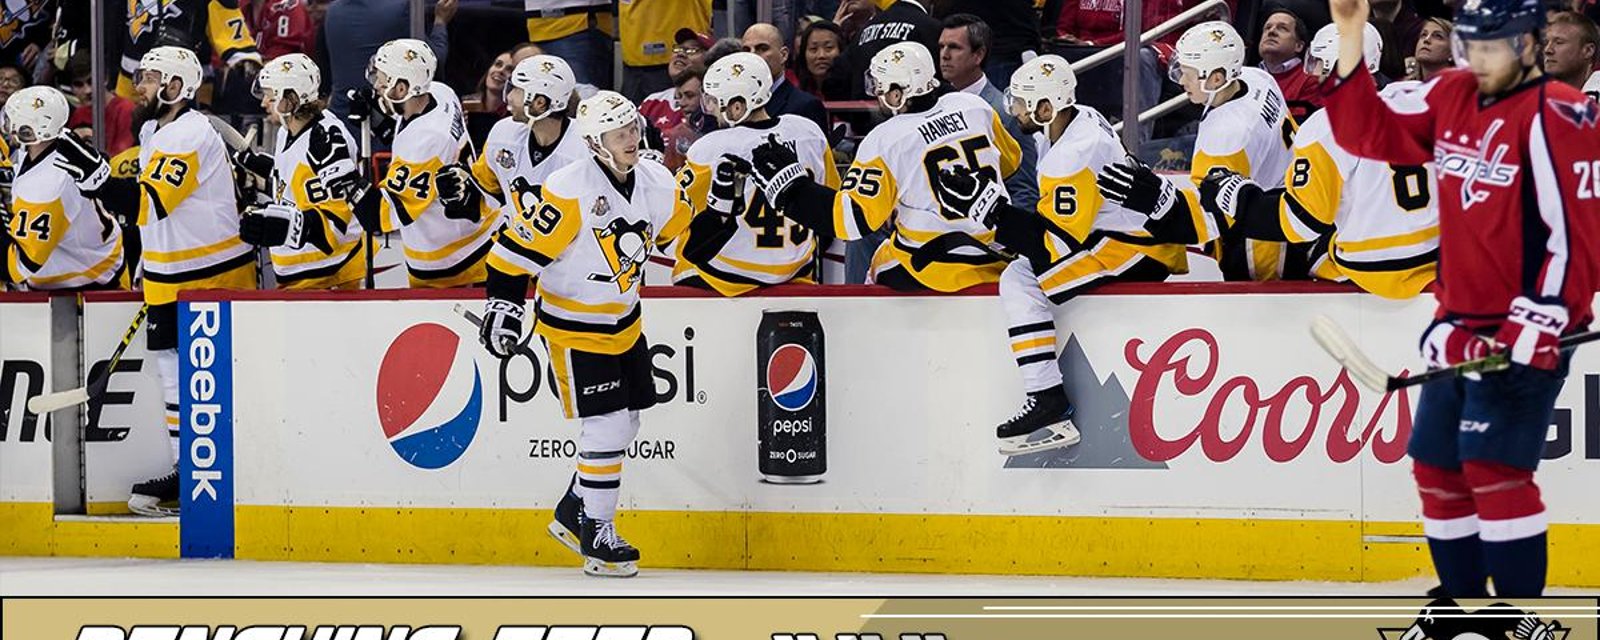 Guentzel sets record in Pens victory